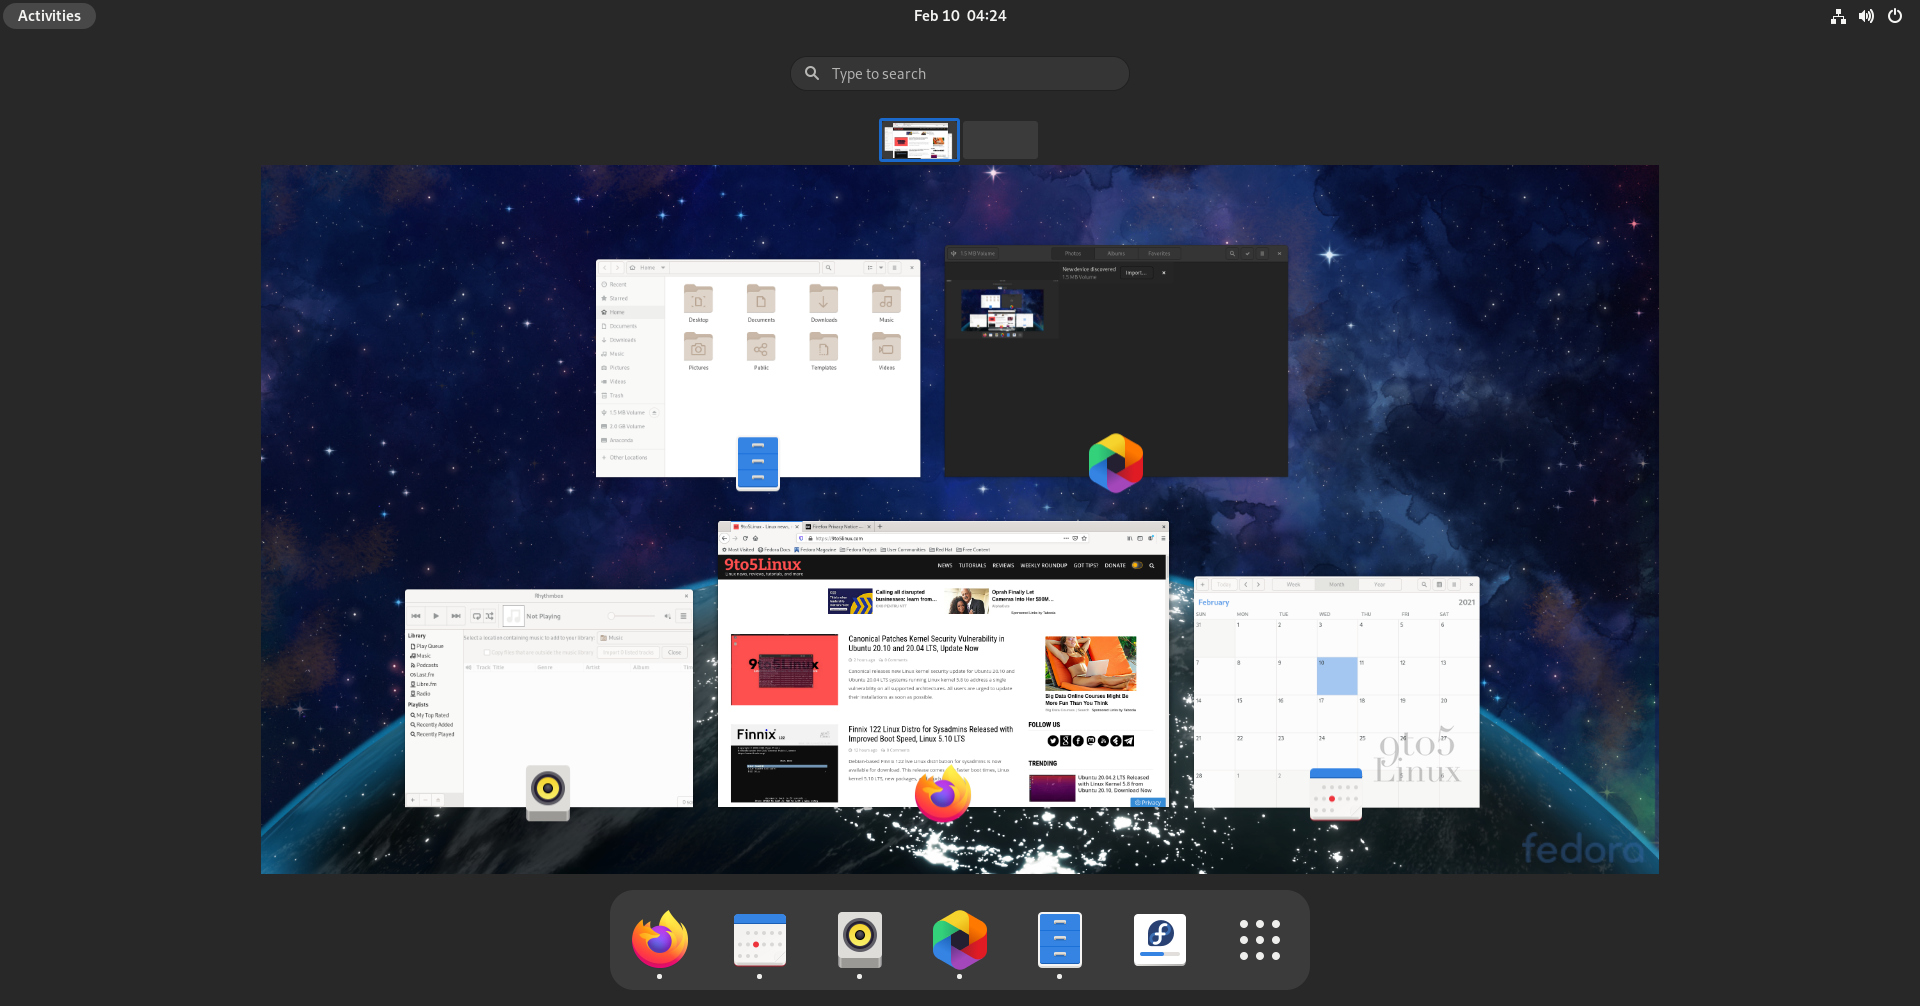 First Look at GNOME 40’s New Design Changes in Fedora 34